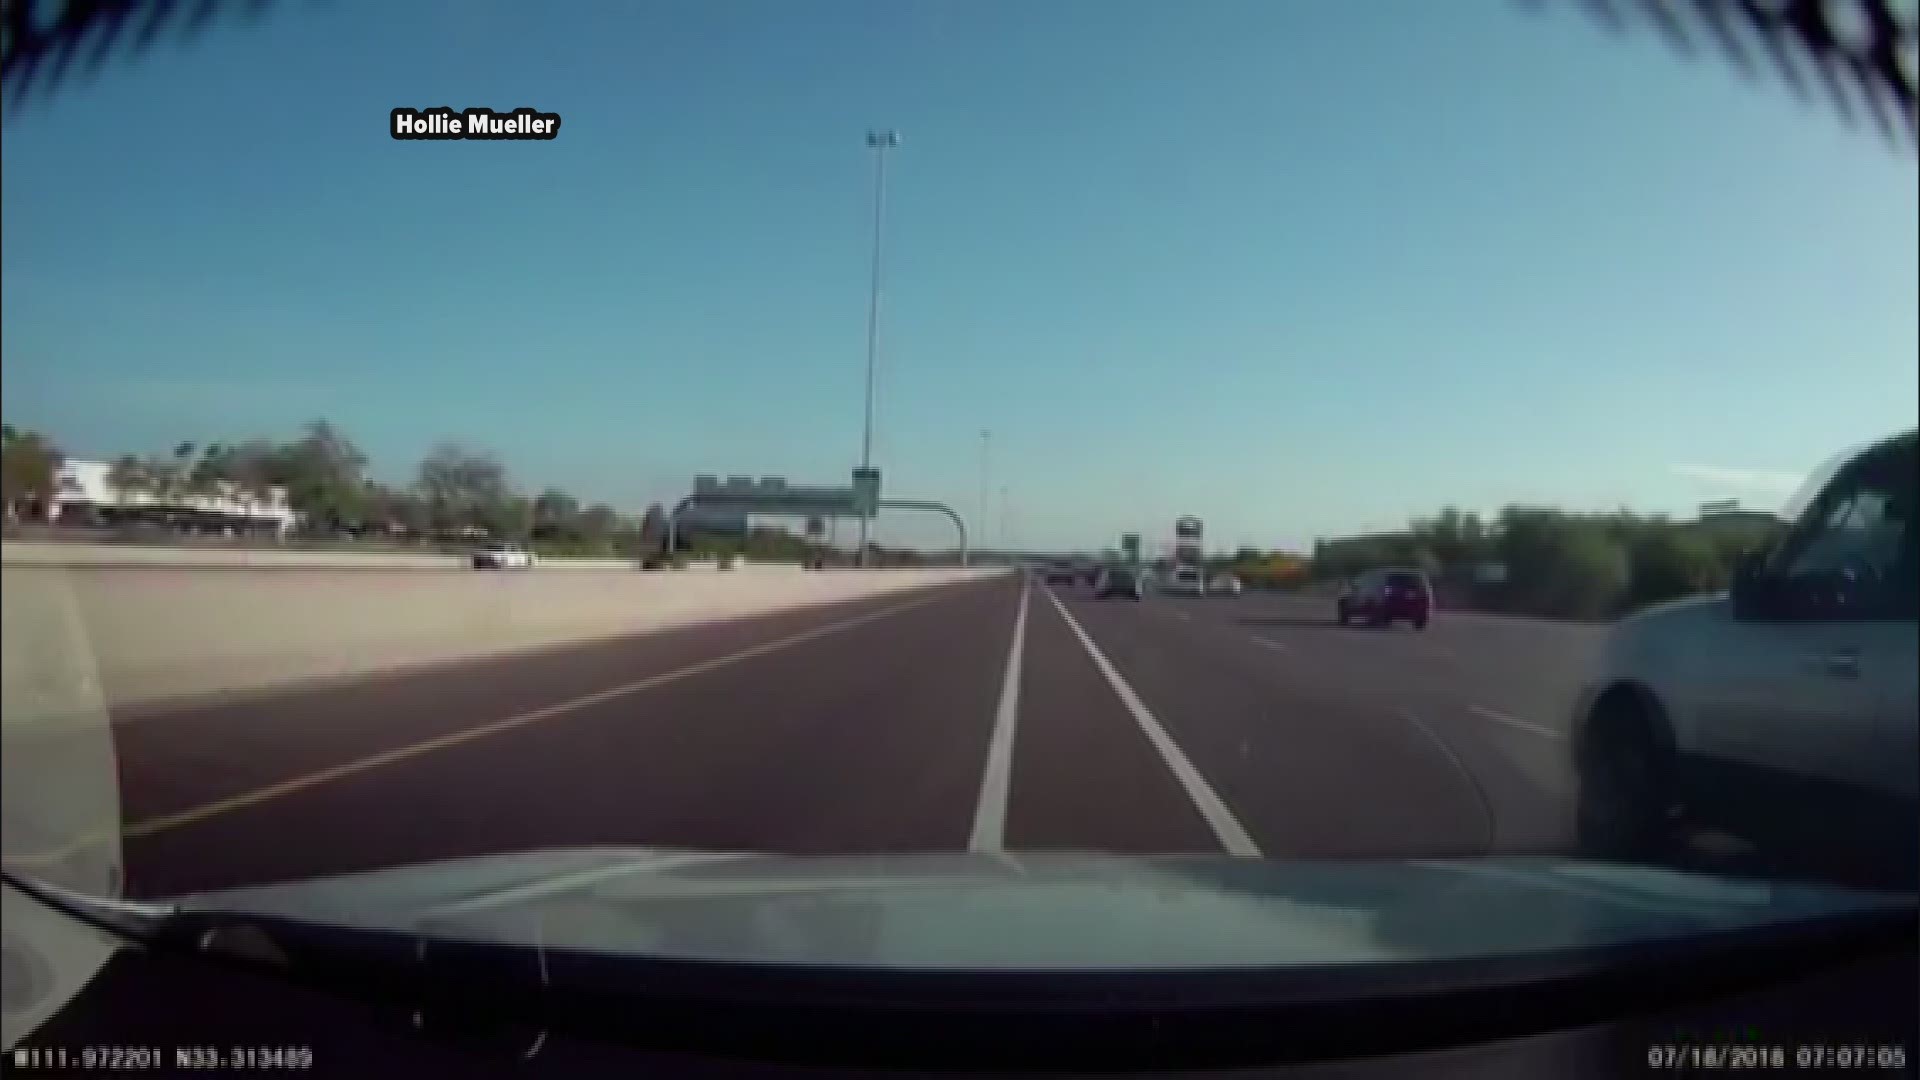 12 News viewer Hollie Mueller caught the wrong-way driver arrested by DPS troopers on her dash cam.